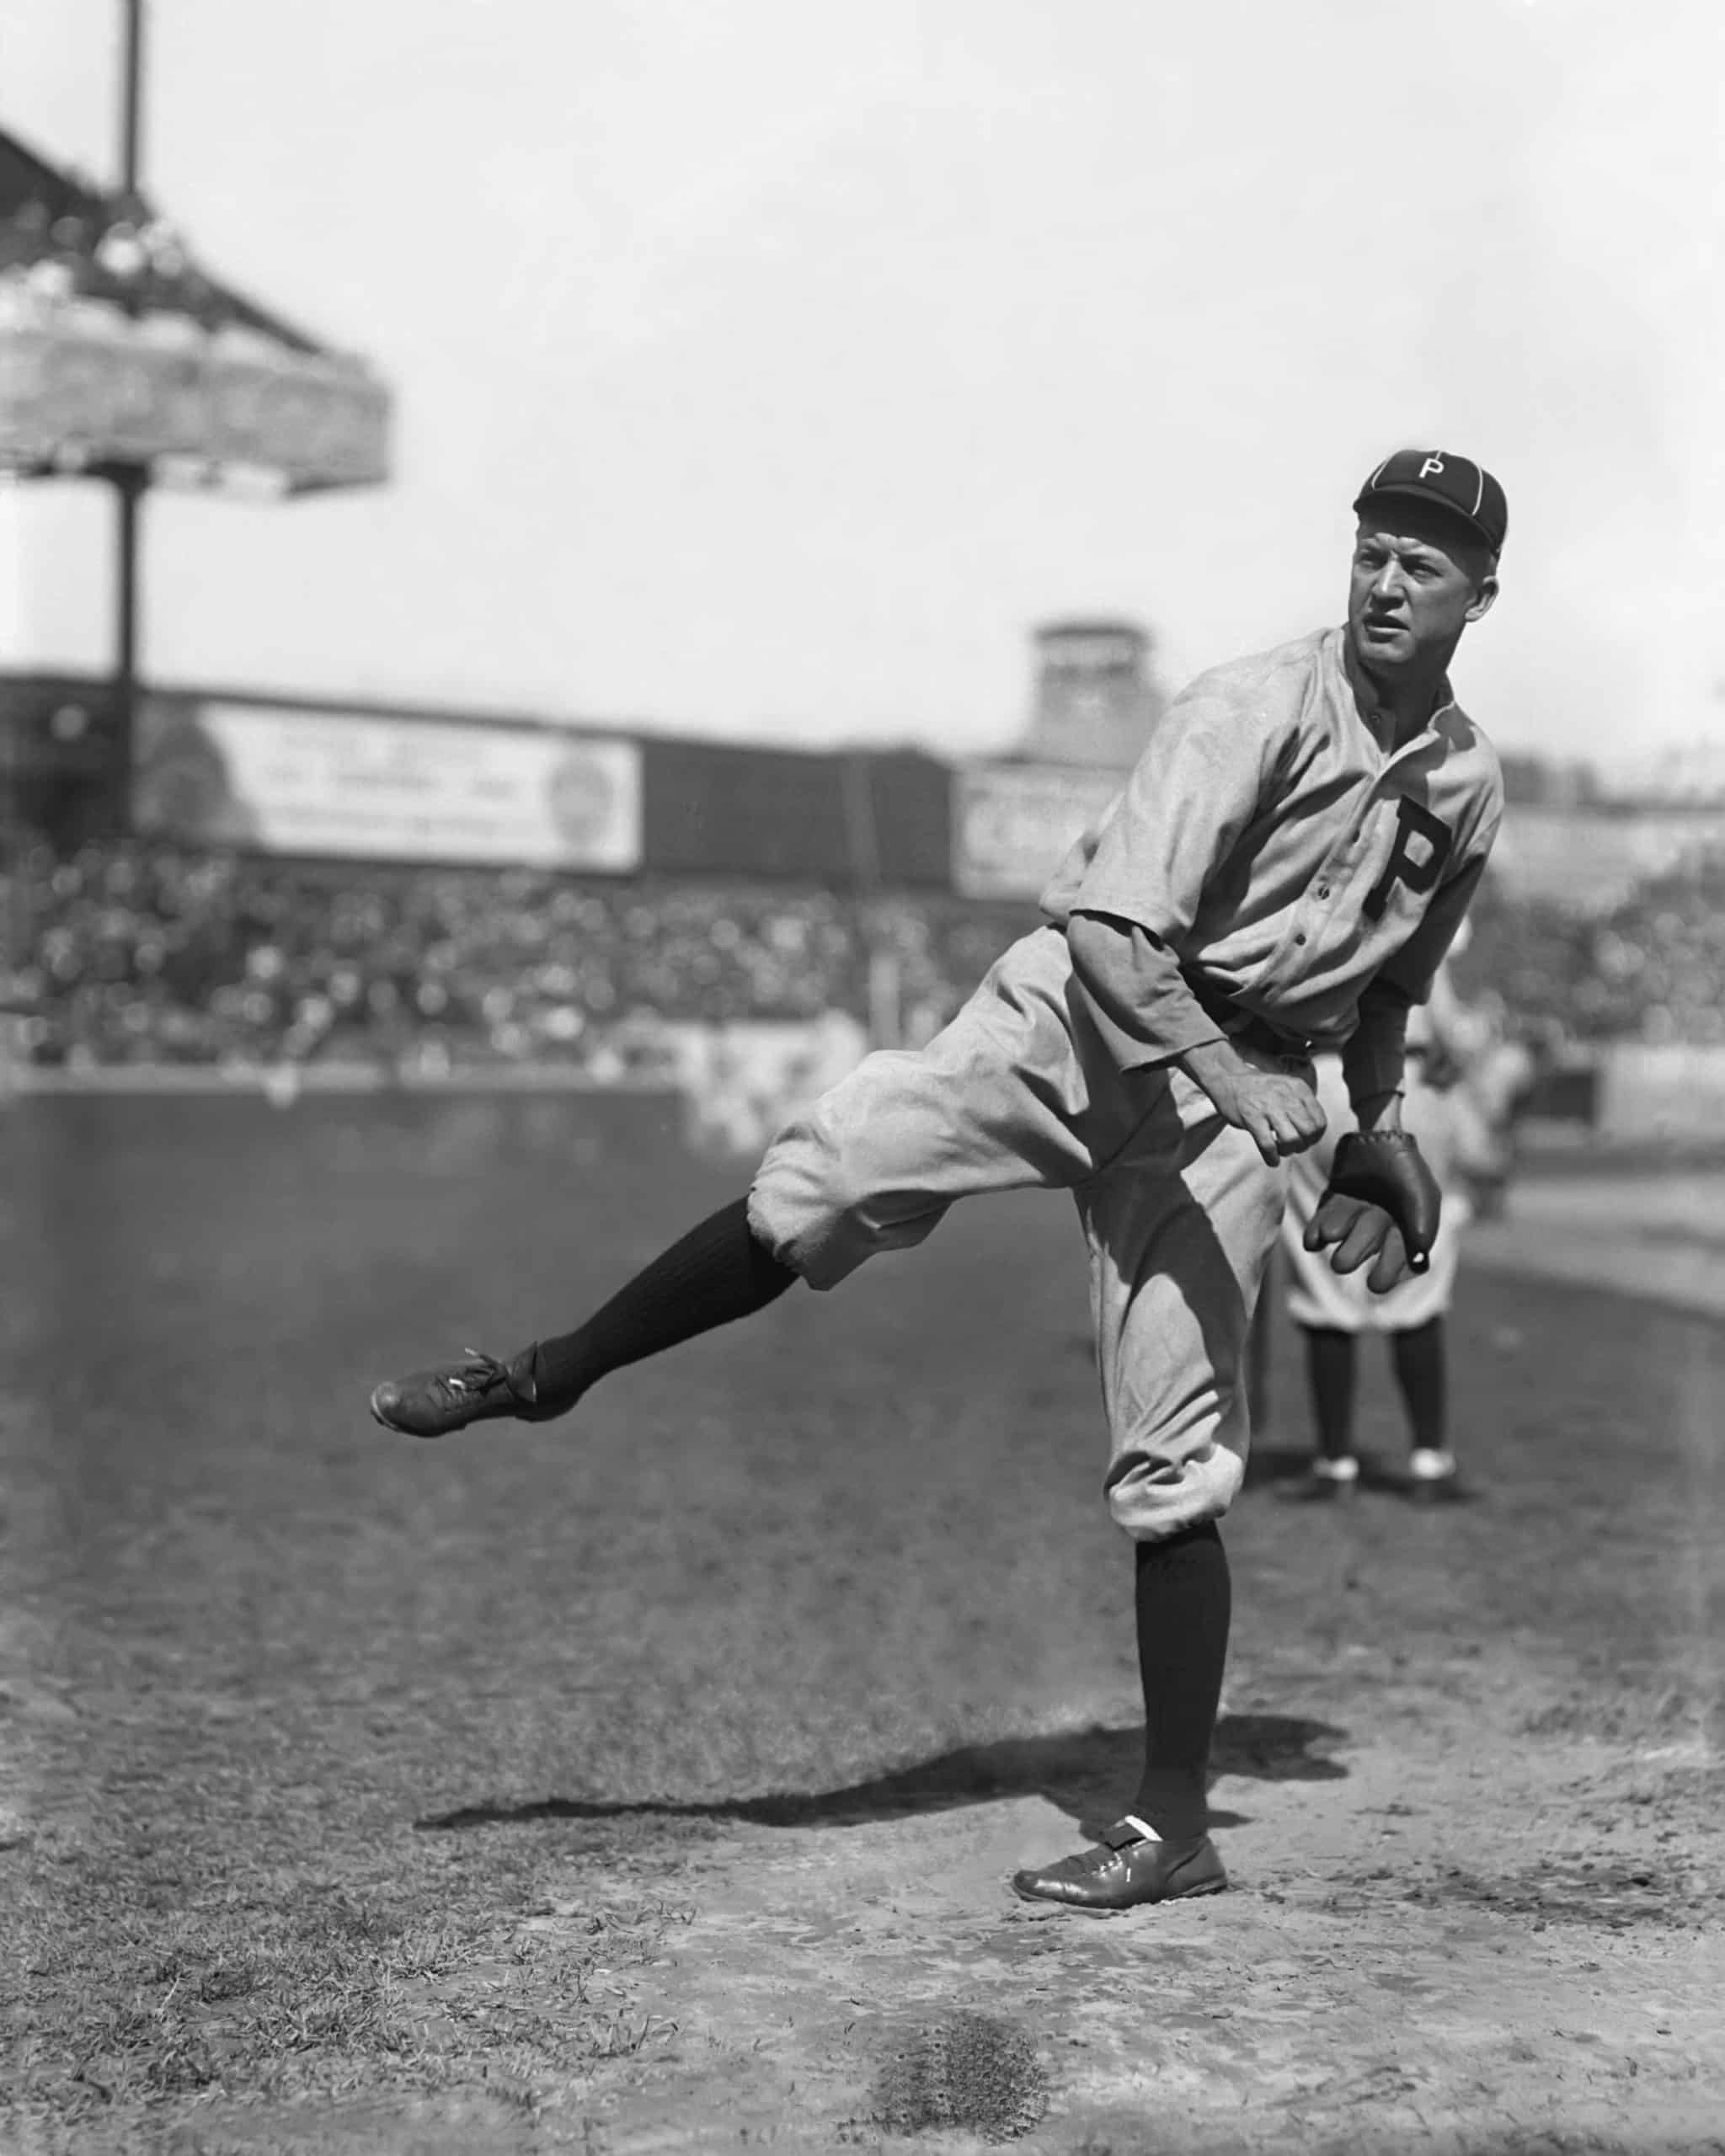 grover cleveland alexander pitching phillies